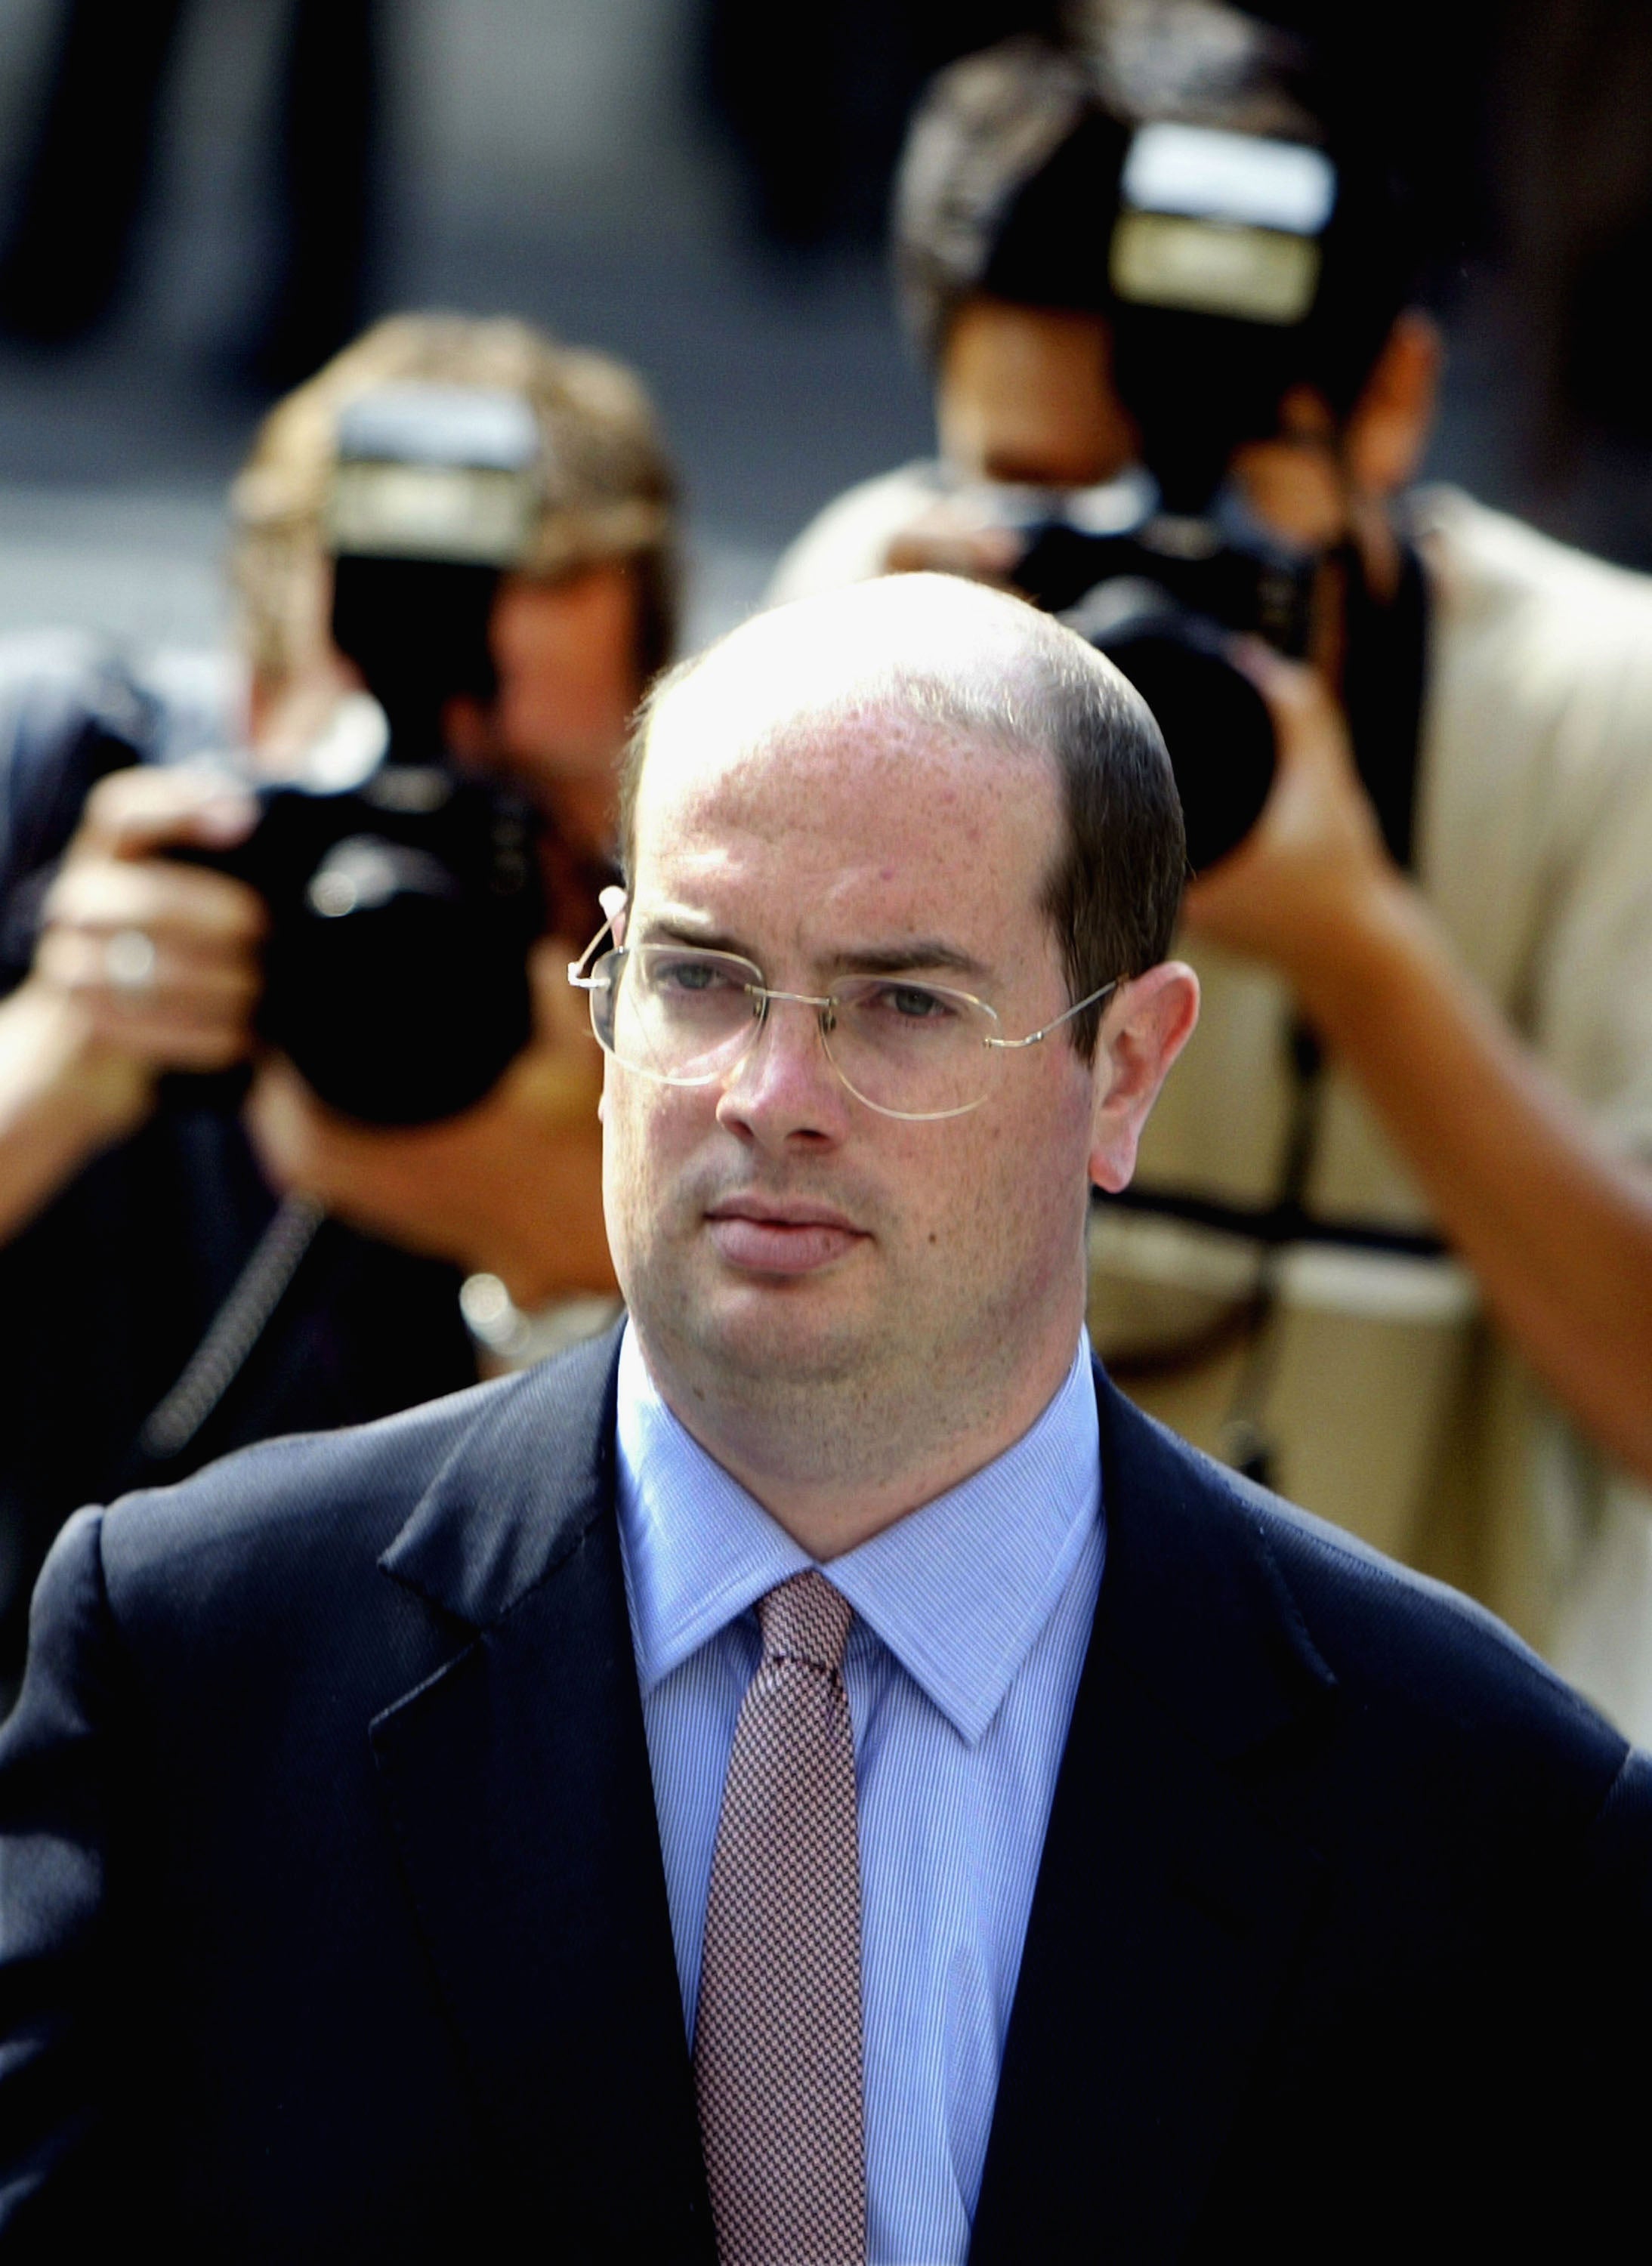 Andrew Gilligan, the Today programme’s defence correspondent